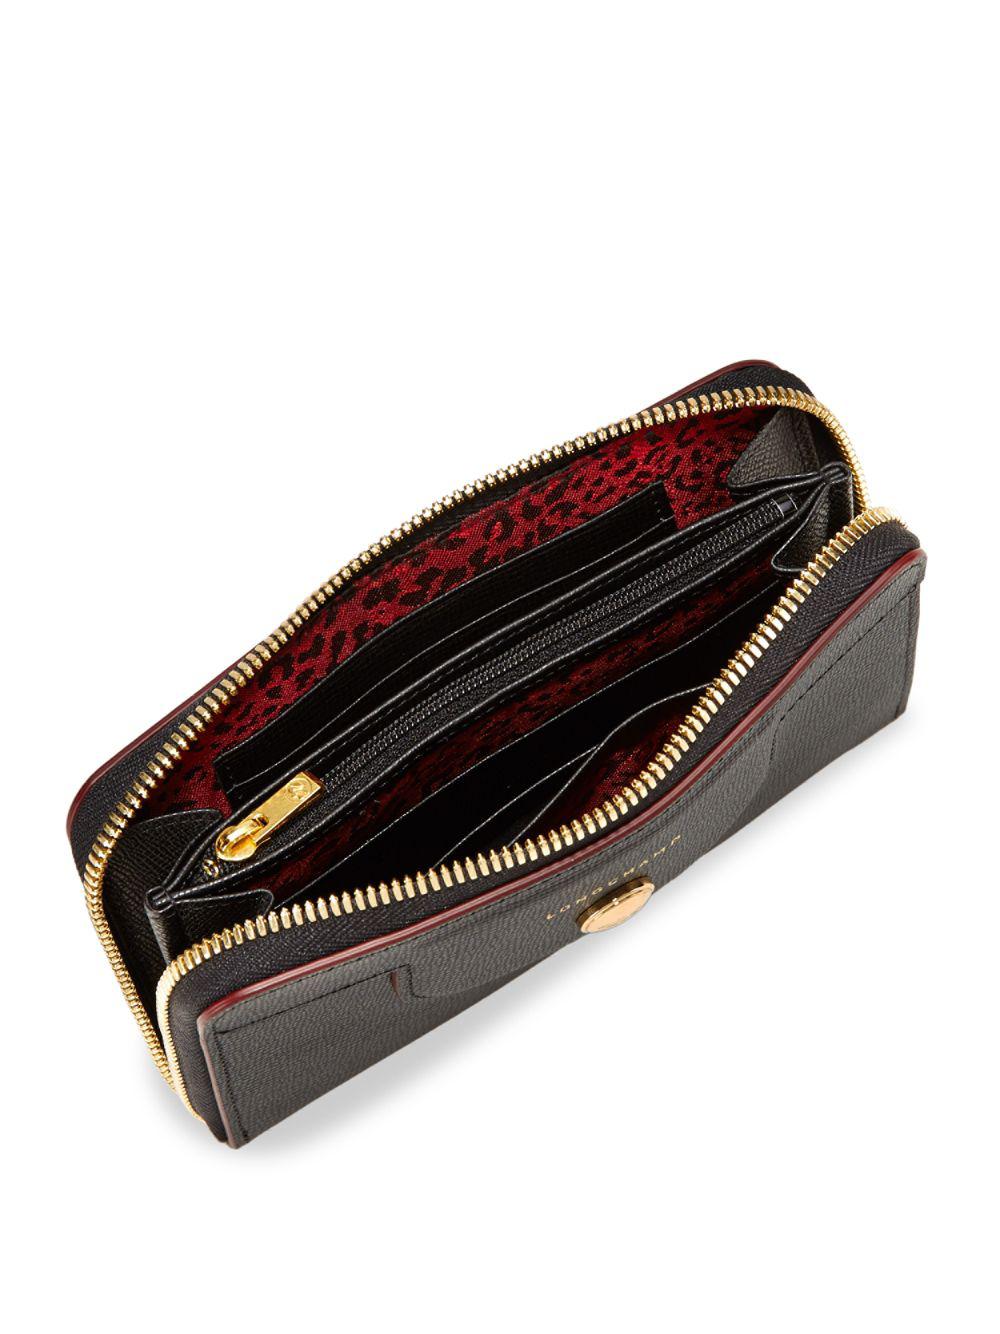 Longchamp Le Pliage Heritage Compact Wallet in Black | Lyst